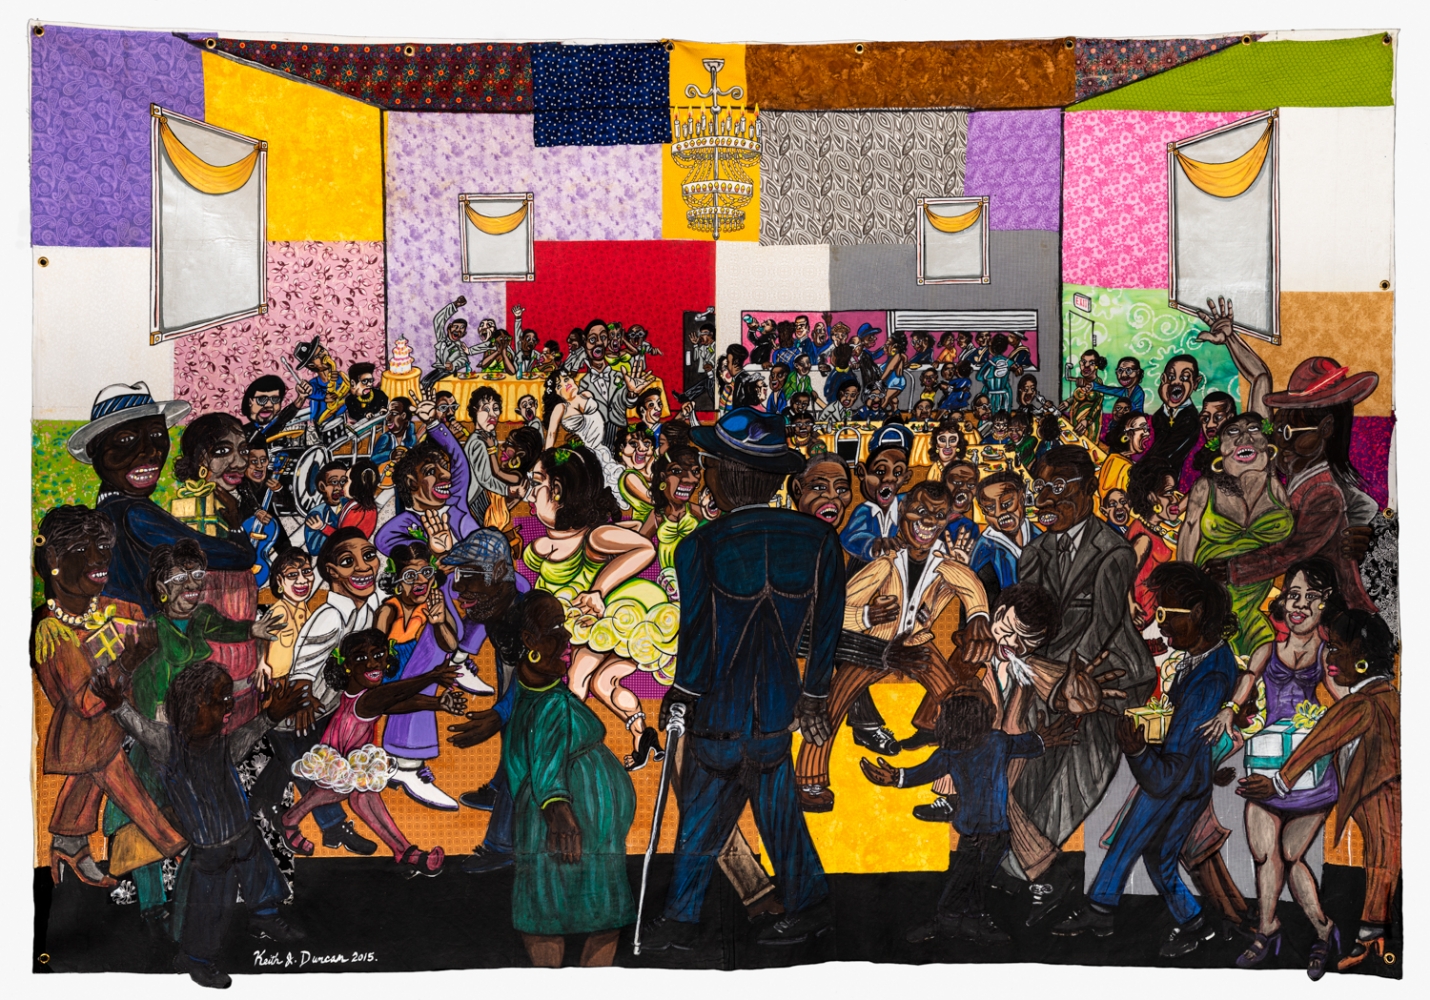 The Wedding Reception, 2015
Acrylic on unstretched canvas with fabric
93 x 137 inches